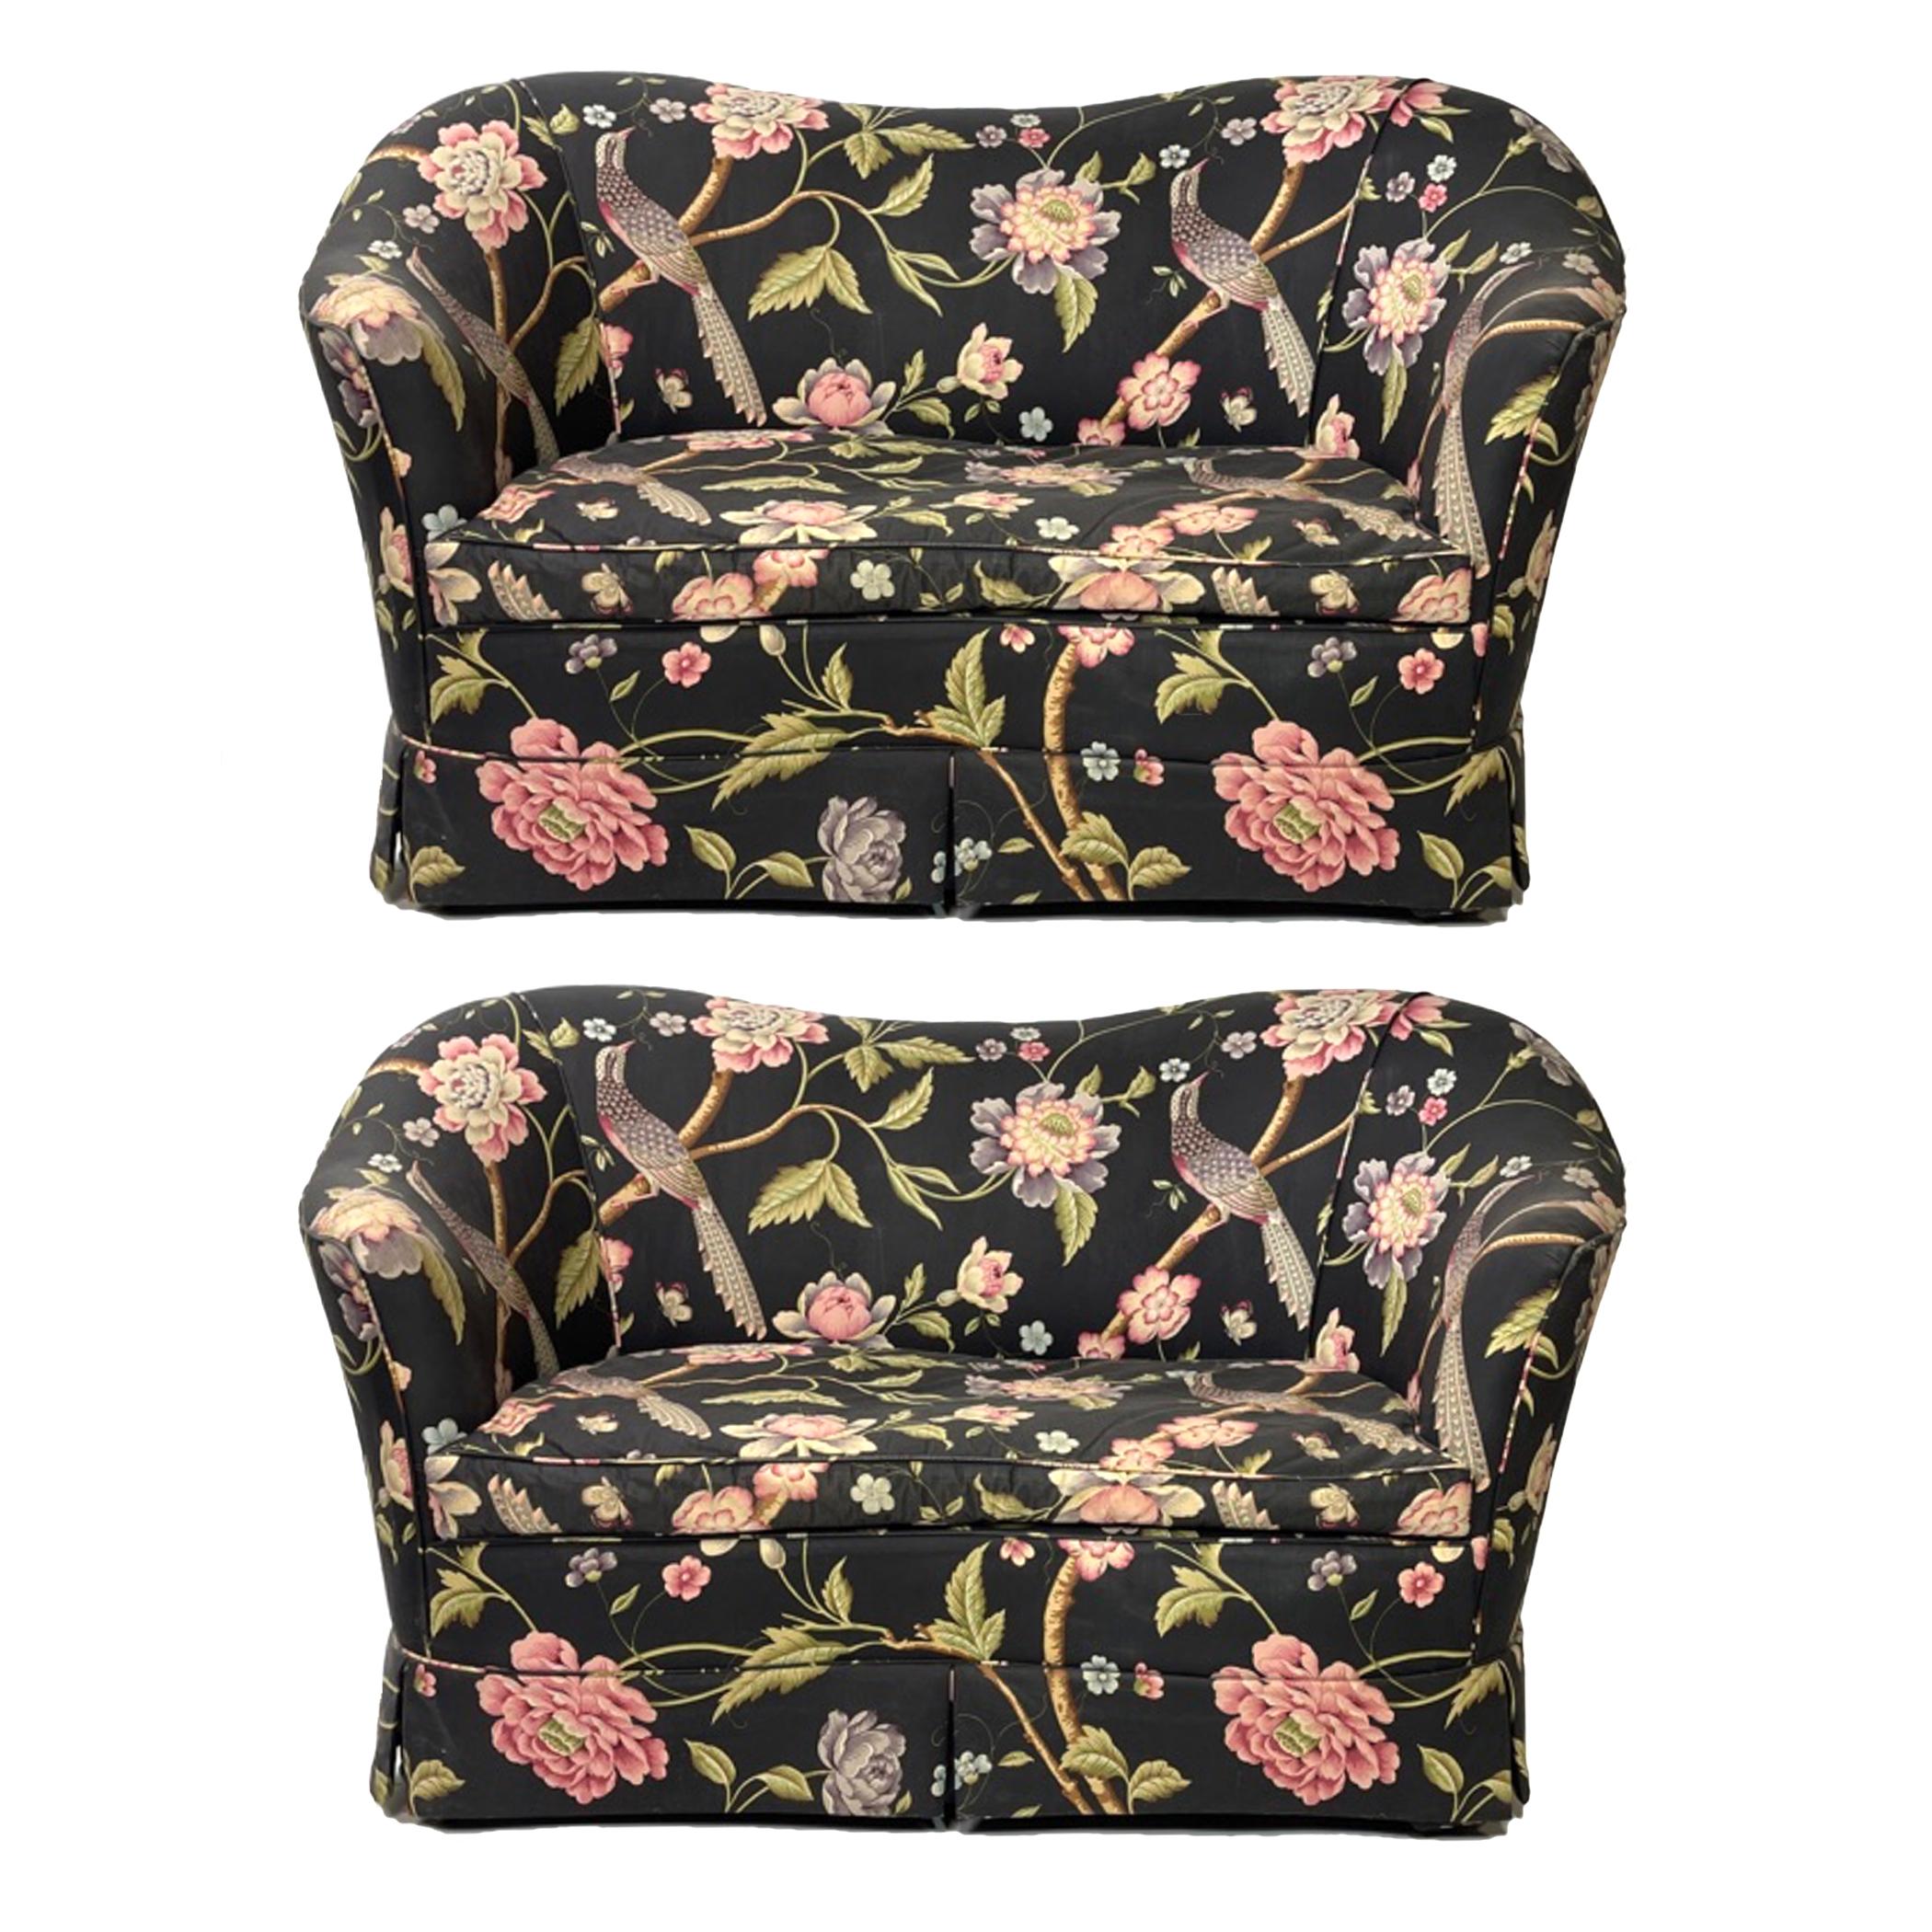 Gorgeous pair of sculptural settees with a lovely and whimsical chintz upholstery. There is an unfortunate tear on the right side of one of the settee side panels, that could possibly be repaired with the extra upholstery fabric that we will include.